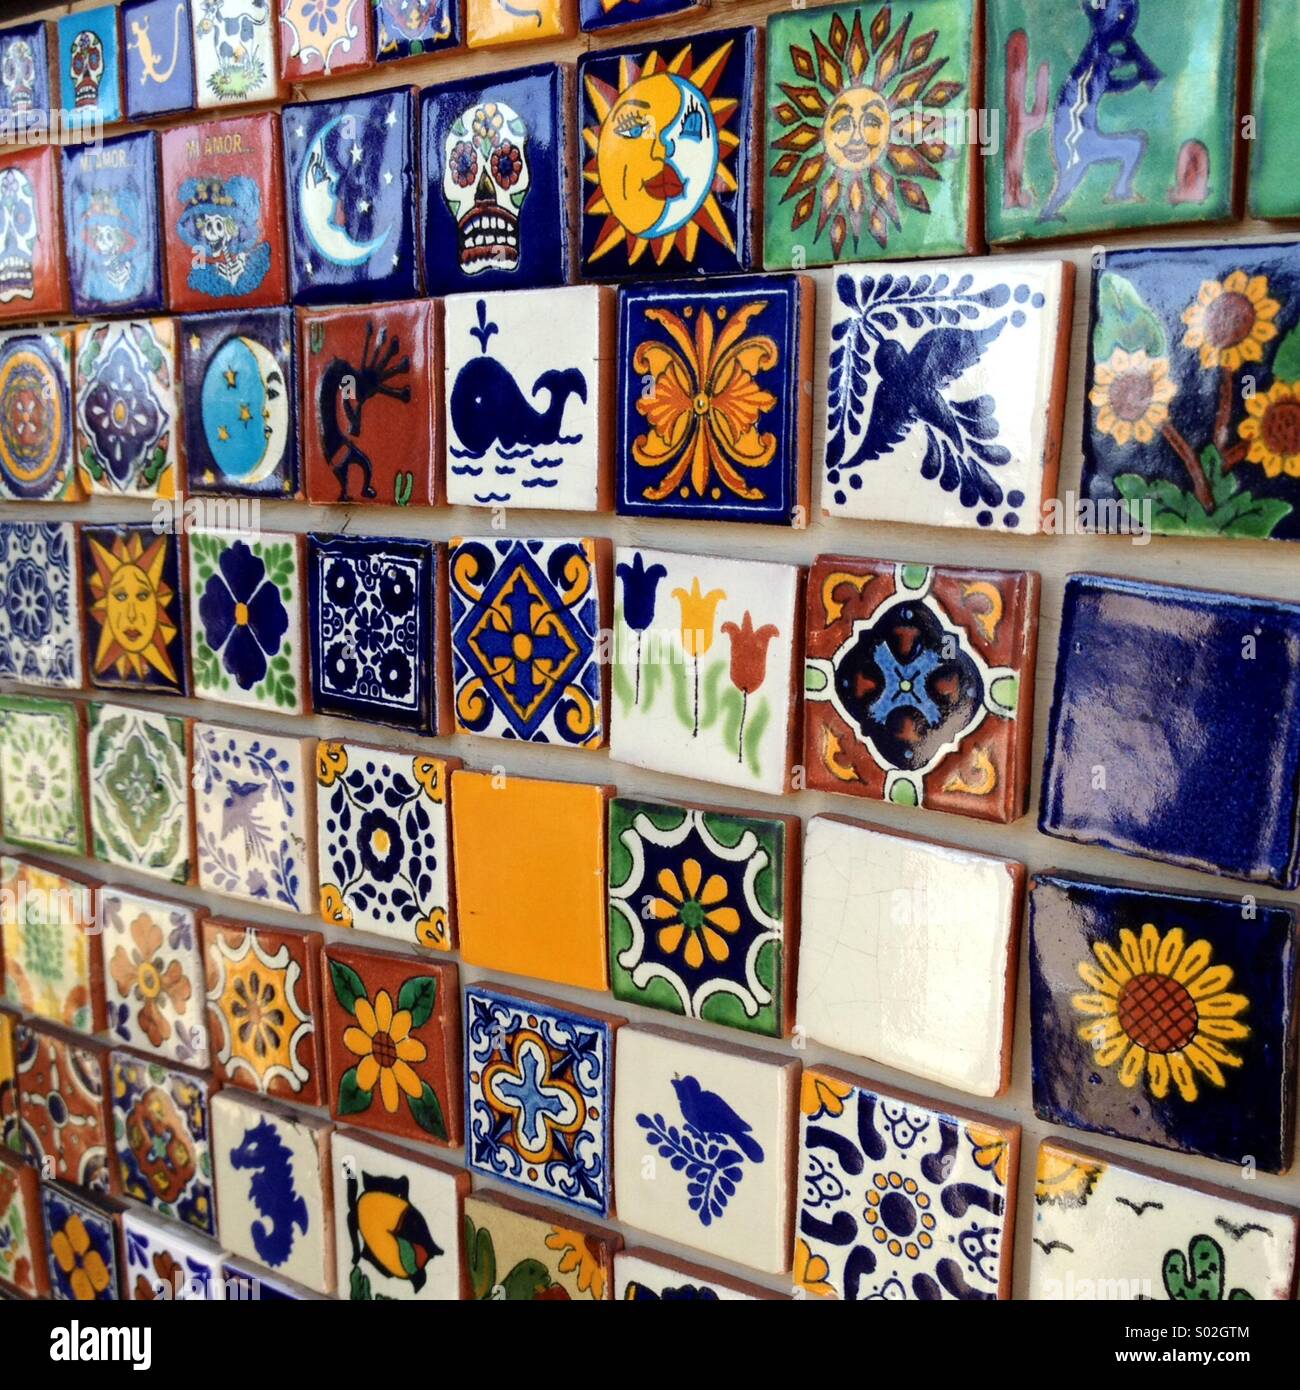 Mexican ceramic tiles on display Stock Photo